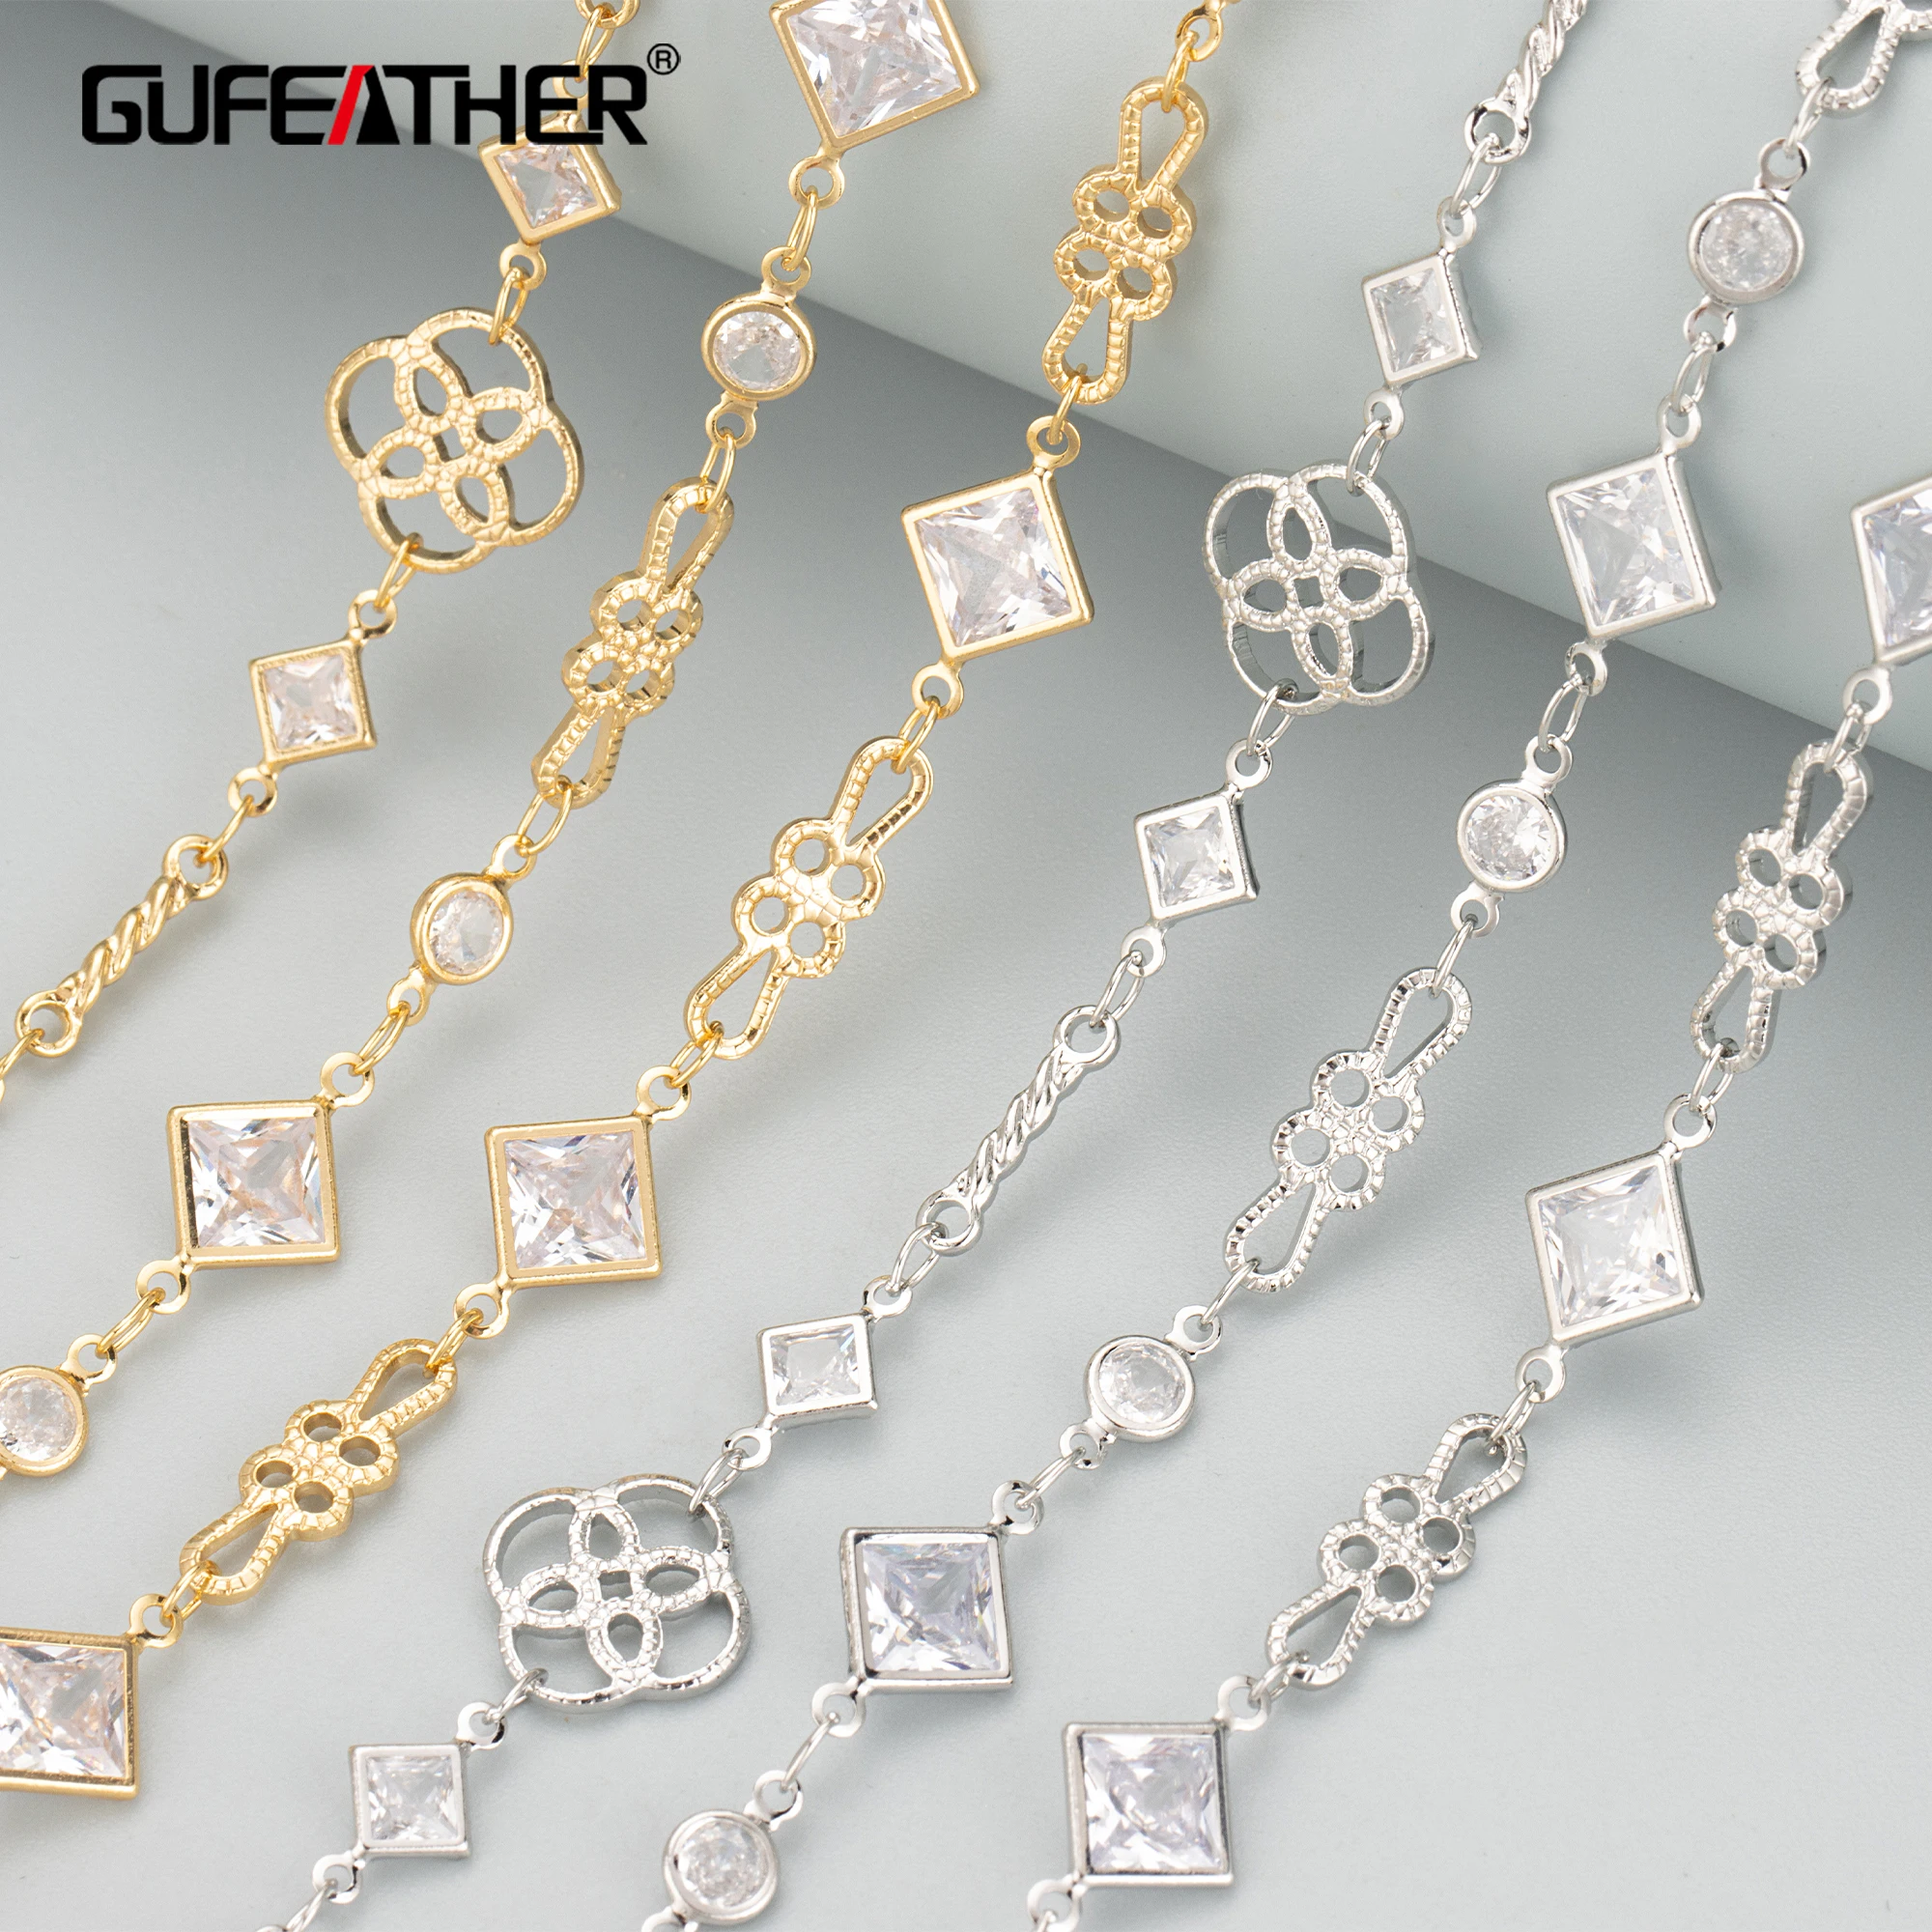 

GUFEATHER C327,chain,hand made,nickel free,18k gold rhodium plated,copper,zircons,jewelry making,diy bracelet necklace,1m/lot